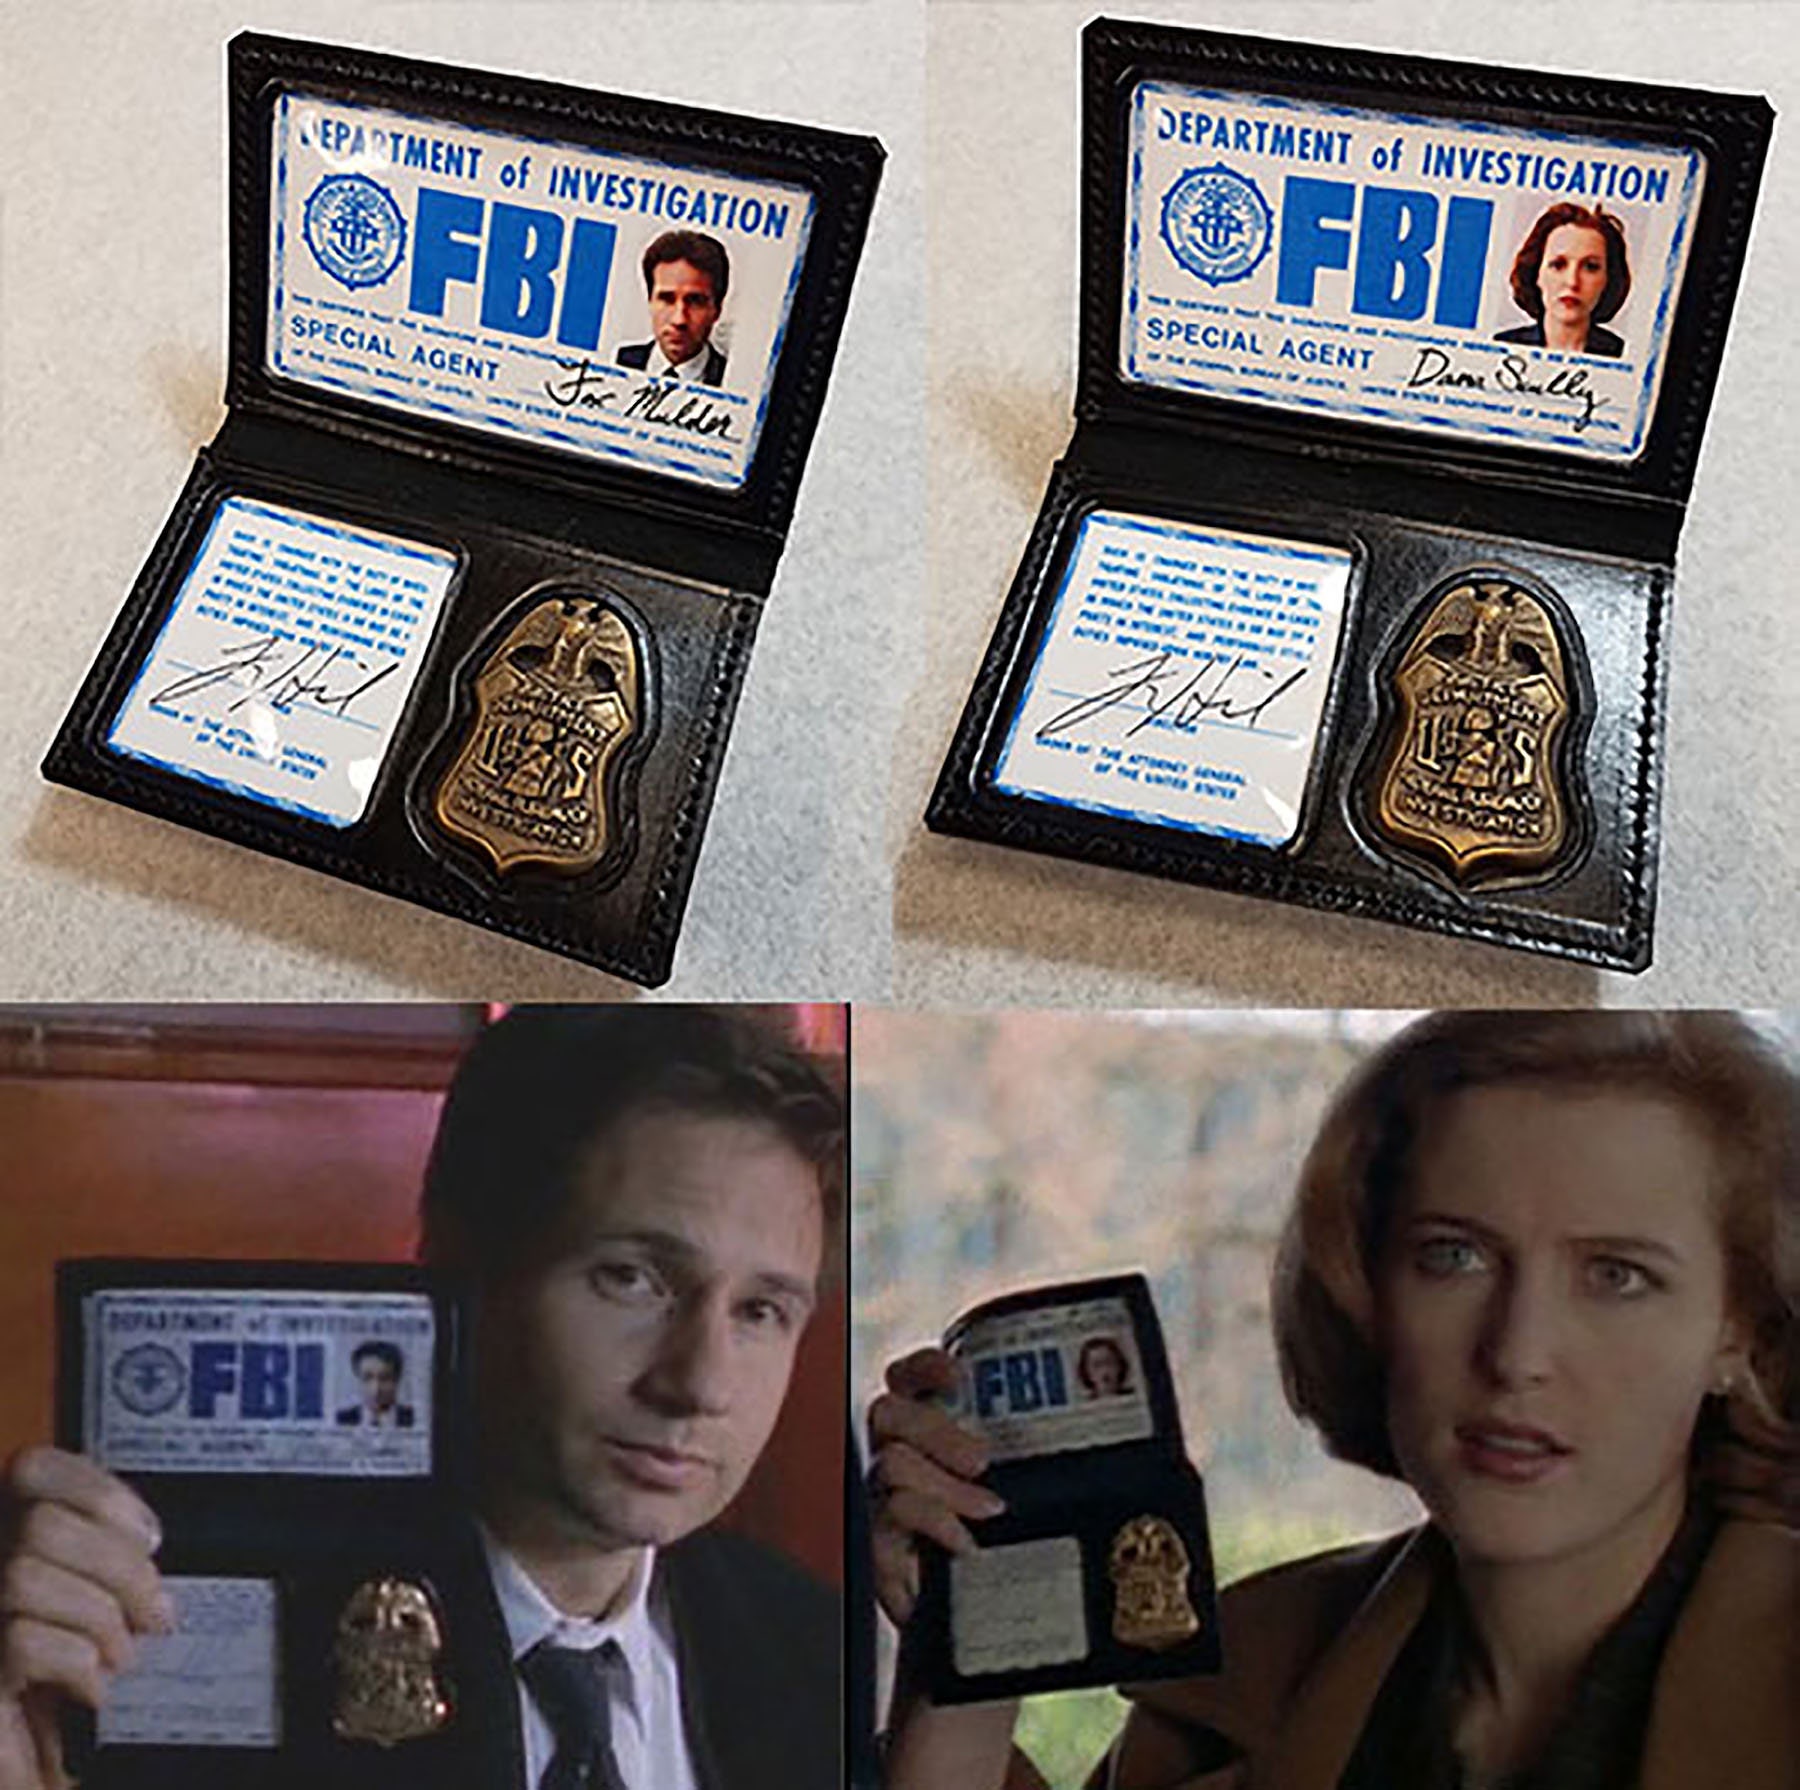 X-files Prop Mulder or Scully Wallet With Badge & ID Hanger 